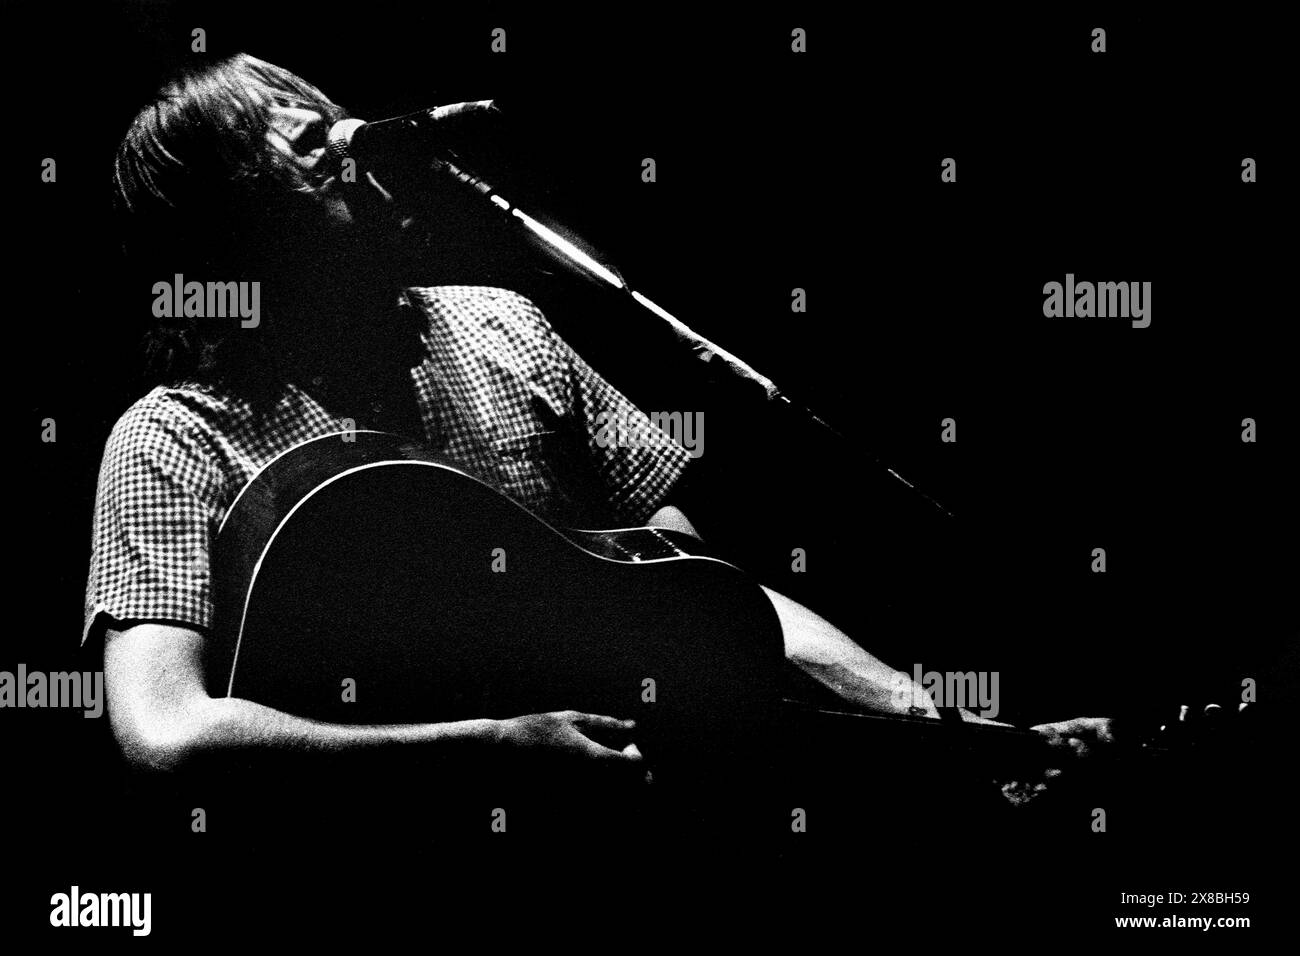 EVAN DANDO, ACOUSTIC STAGE, BOTTLED OFF STAGE, 1995: Evan Dando played a chaotic short set, looked confused and couldn't finish any songs before being bottled off by a restless crowd live on the Acoustic Stage at the Glastonbury Festival, England, June 24 1995. Photo: Rob Watkins Stock Photo